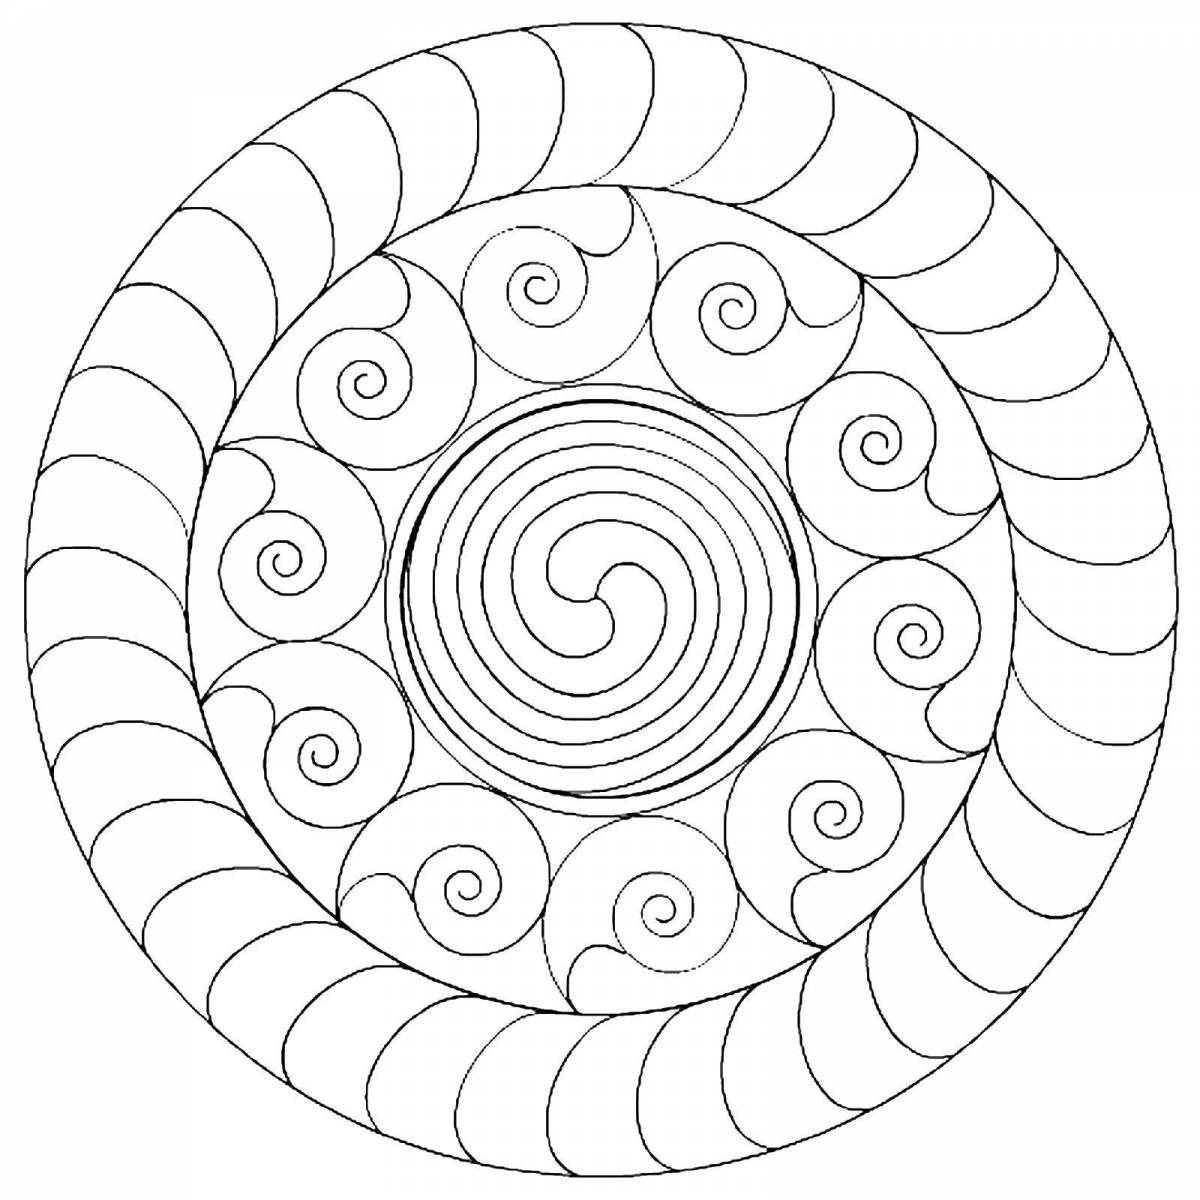 Creative spiral coloring page